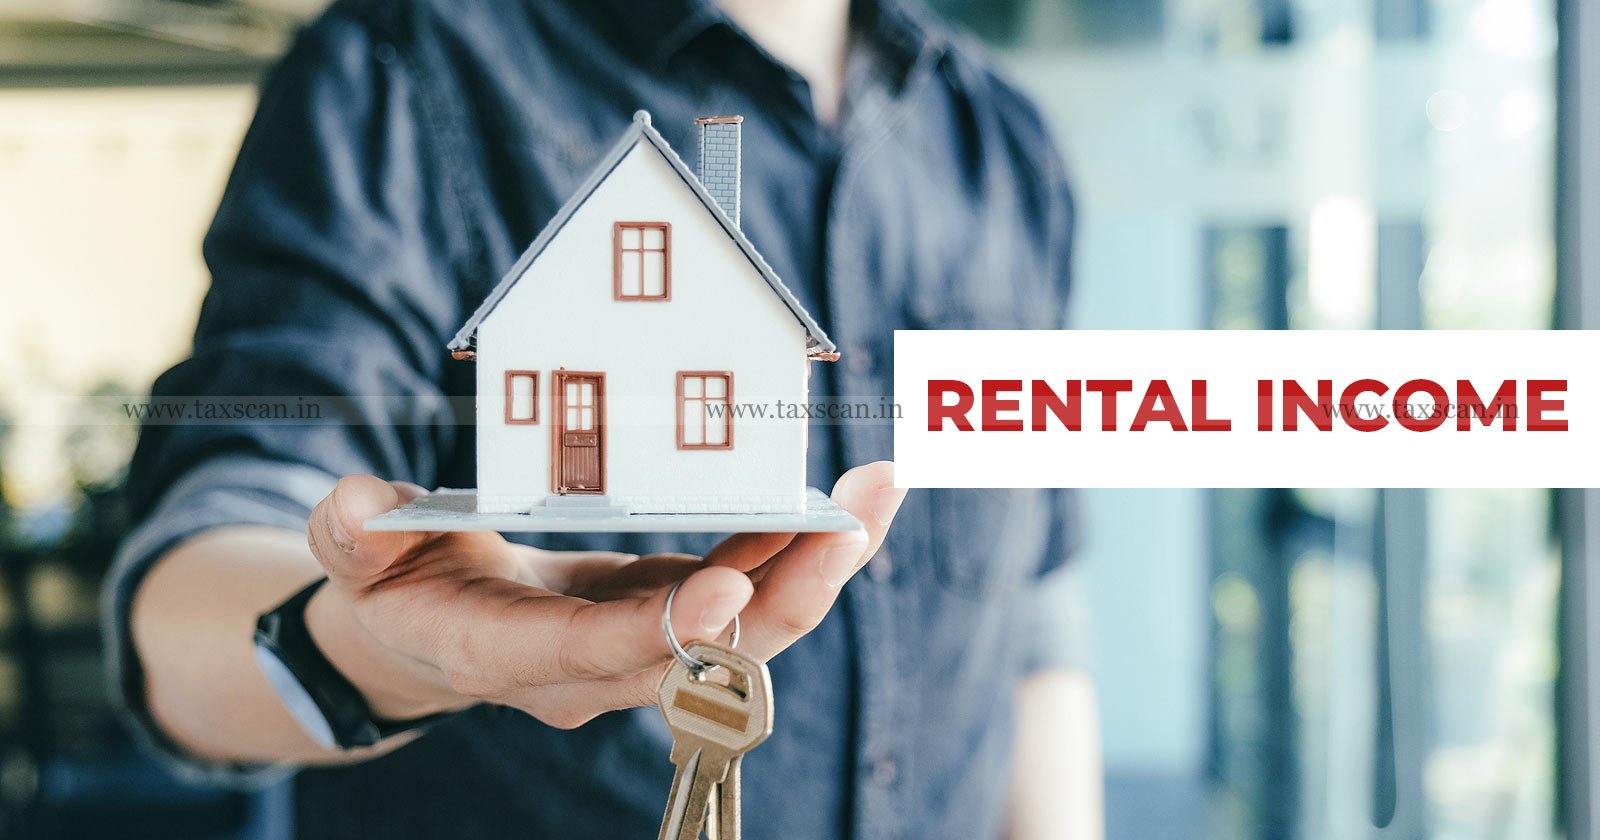 real Rental Income received from litigation filed - Income received from litigation filed - real Rental Income - recovery of arrears of Rent - ITAT deletes addition - notional Rental Income - taxscan